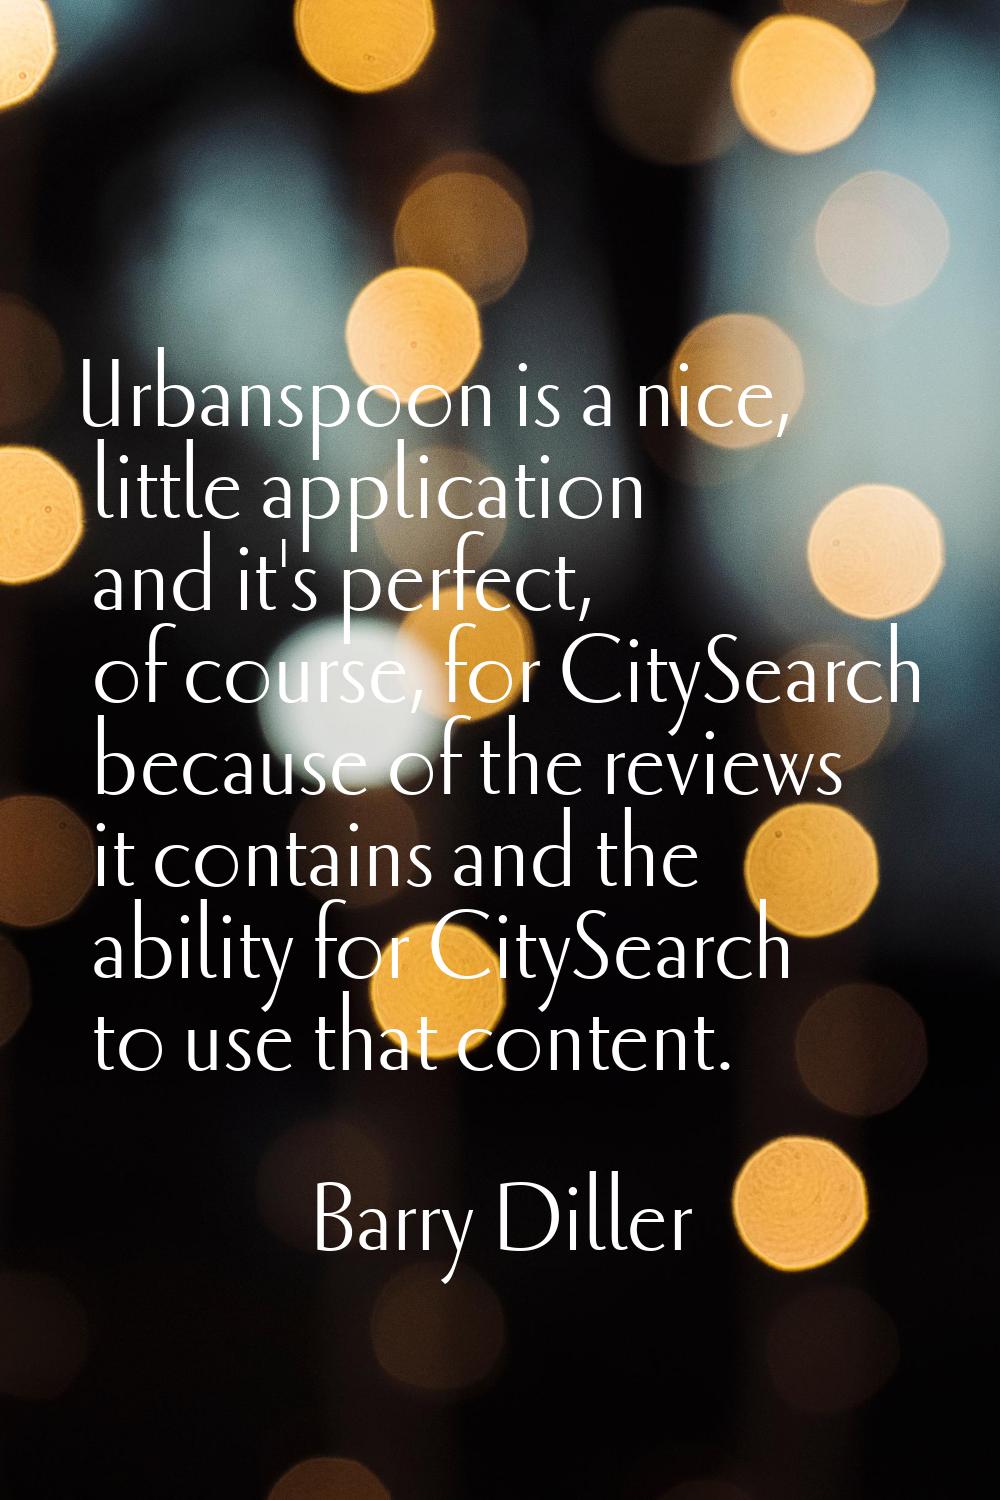 Urbanspoon is a nice, little application and it's perfect, of course, for CitySearch because of the